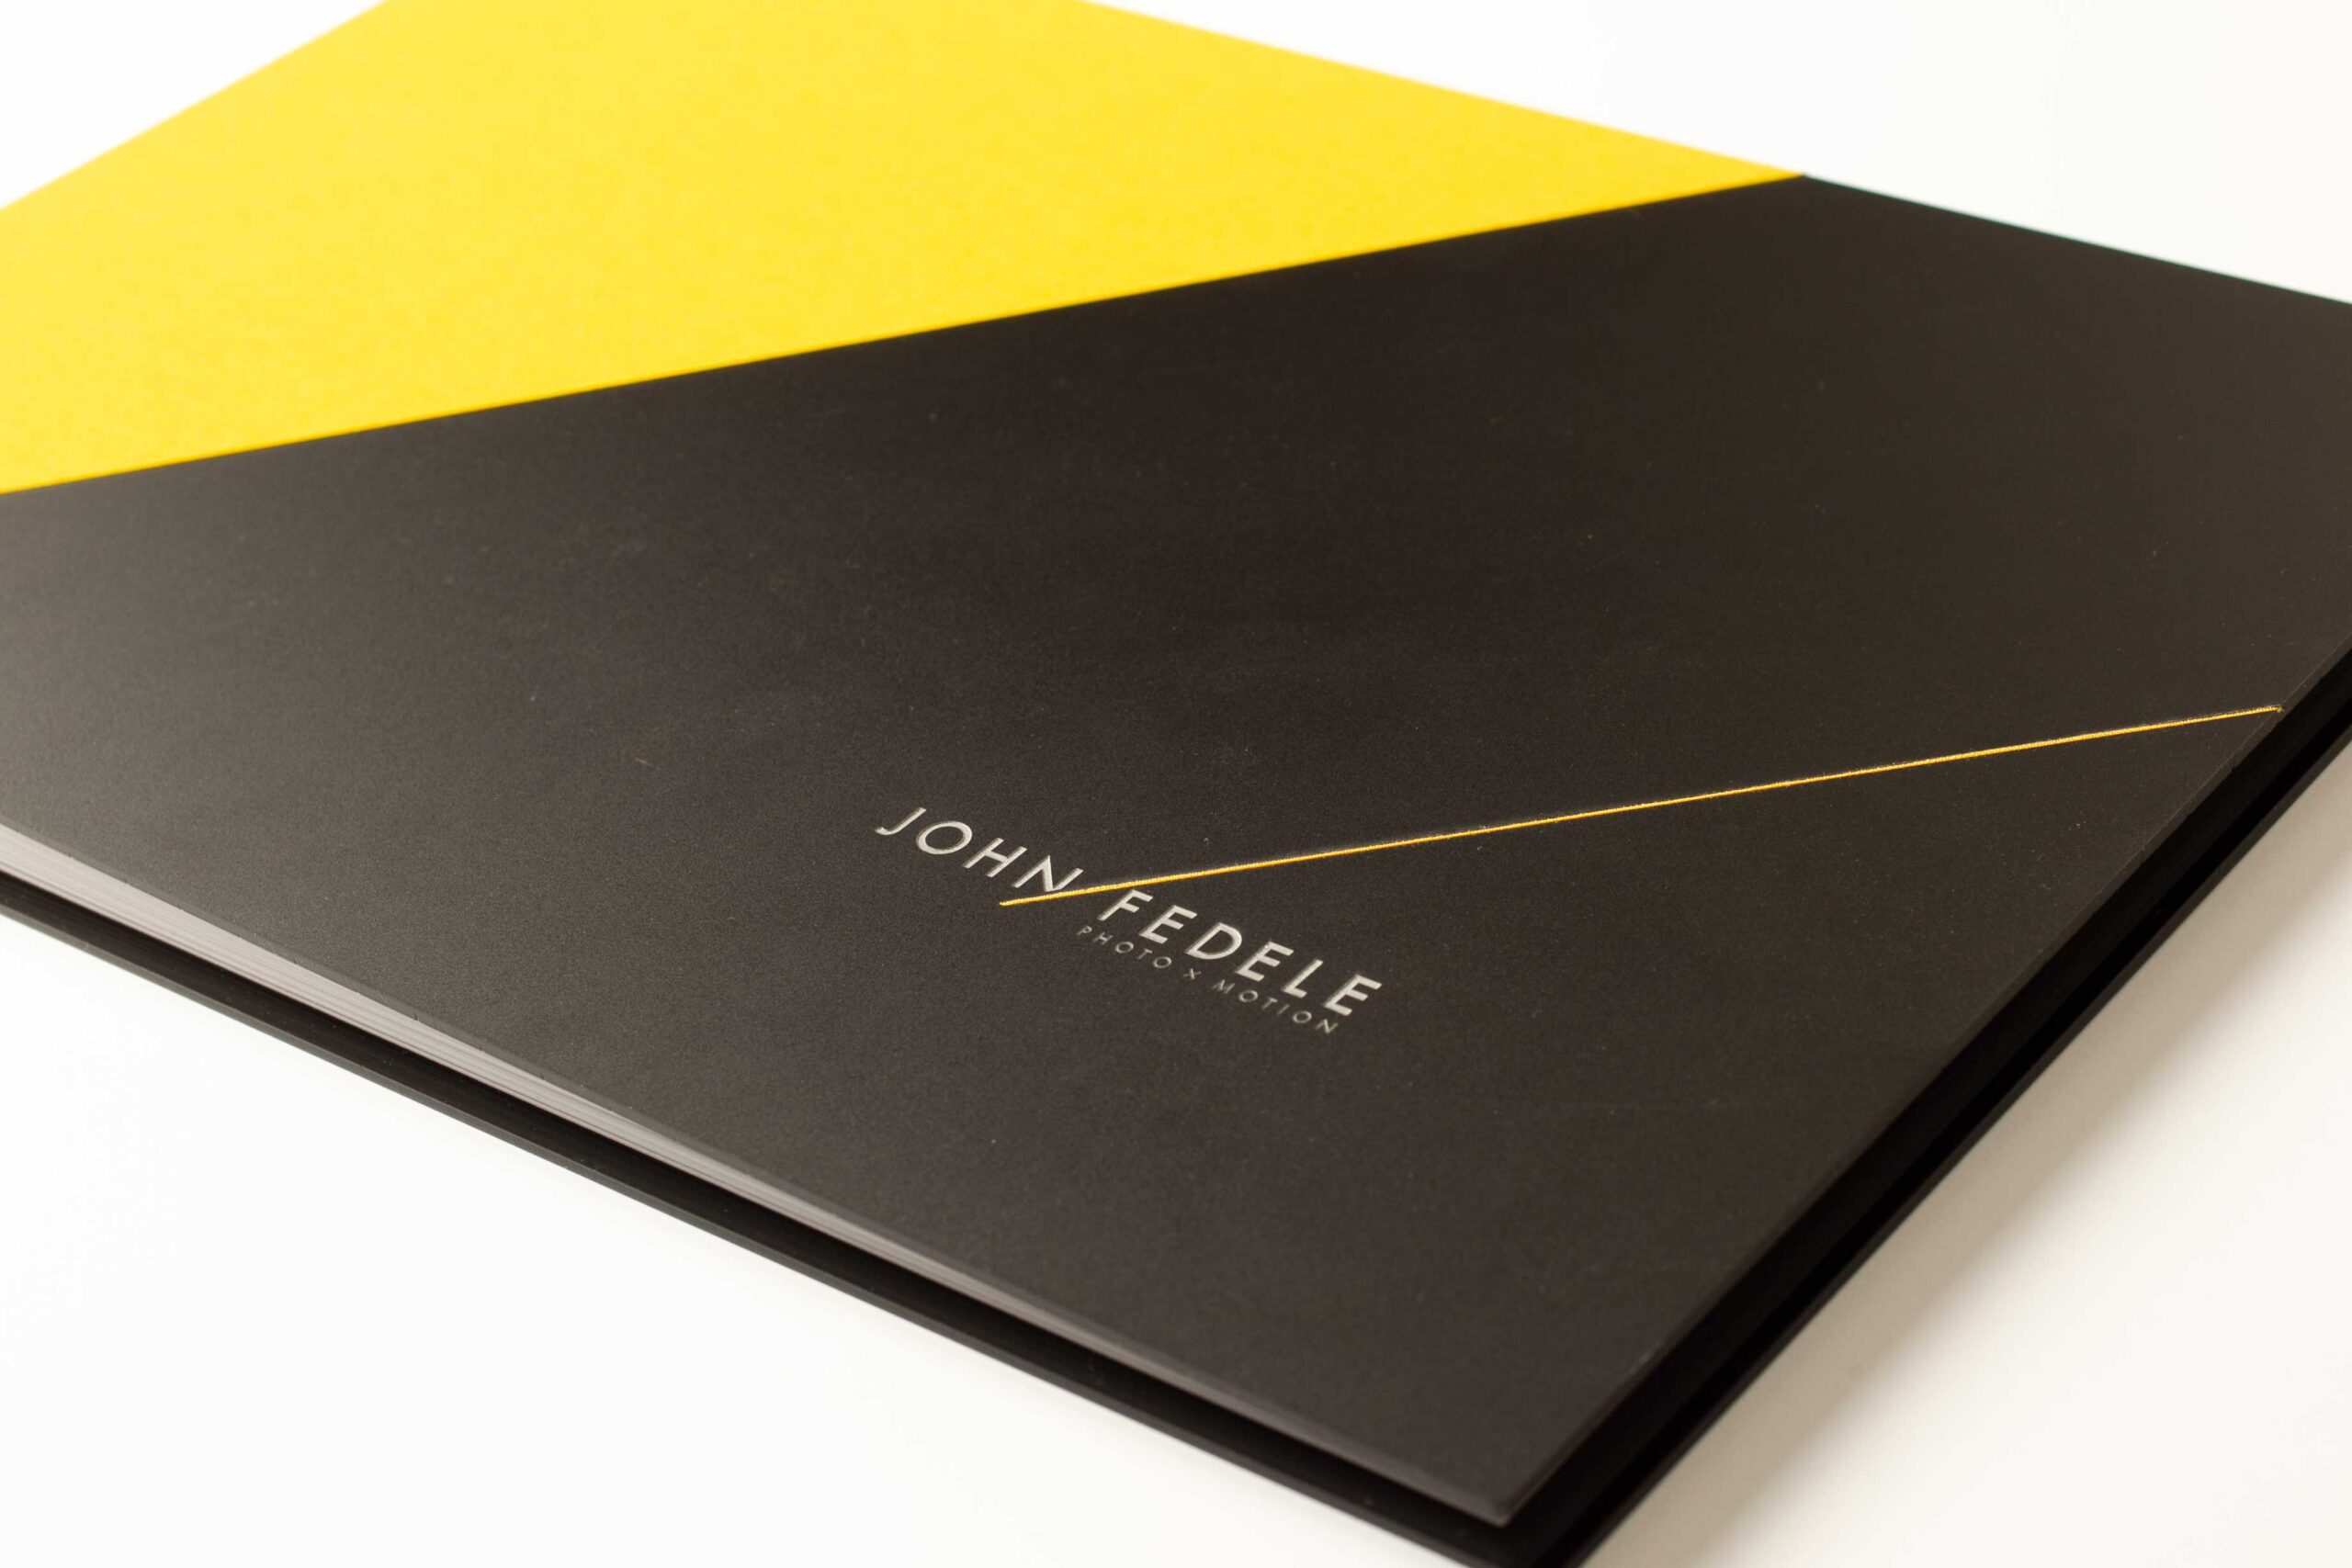 An image of the cover of John Fedele's photobook.